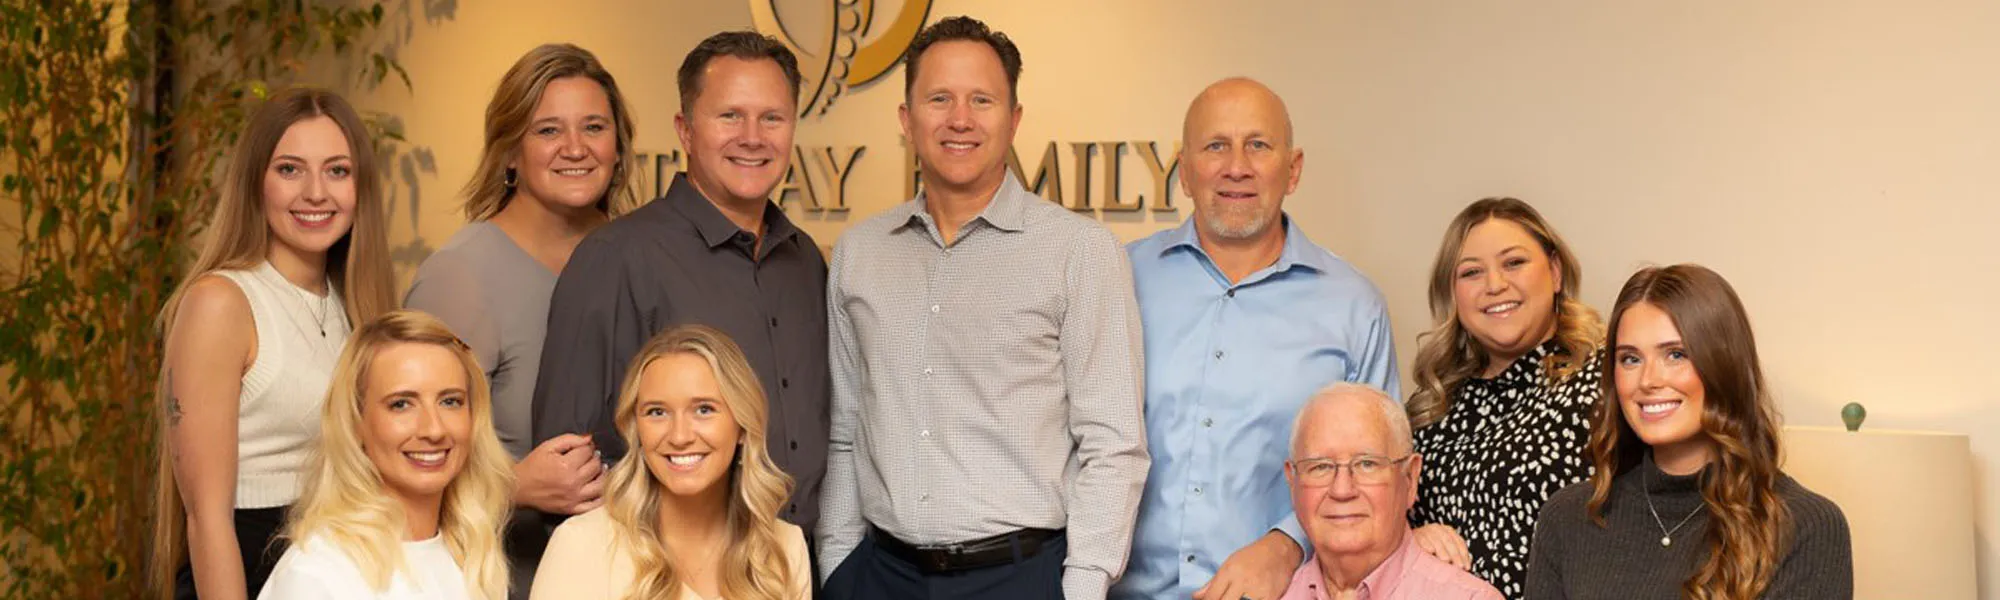 Chiropractor Loveland CO David And Michael Hughes With Team New Patient Special Offer